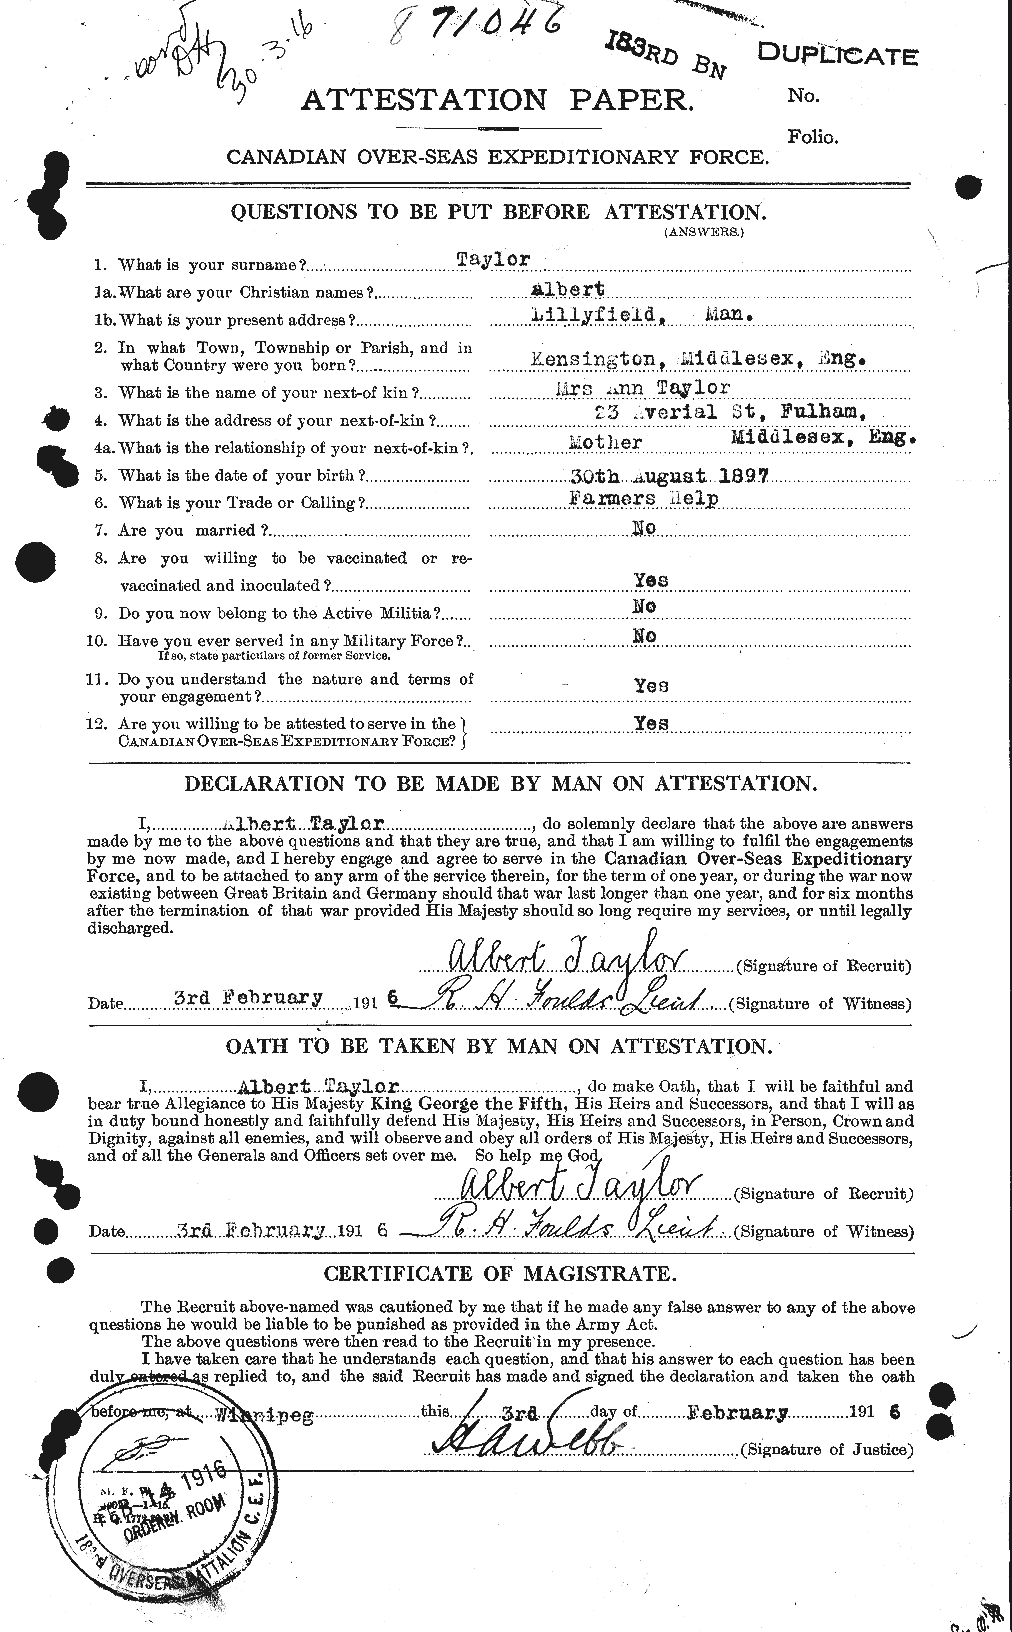 Personnel Records of the First World War - CEF 626080a